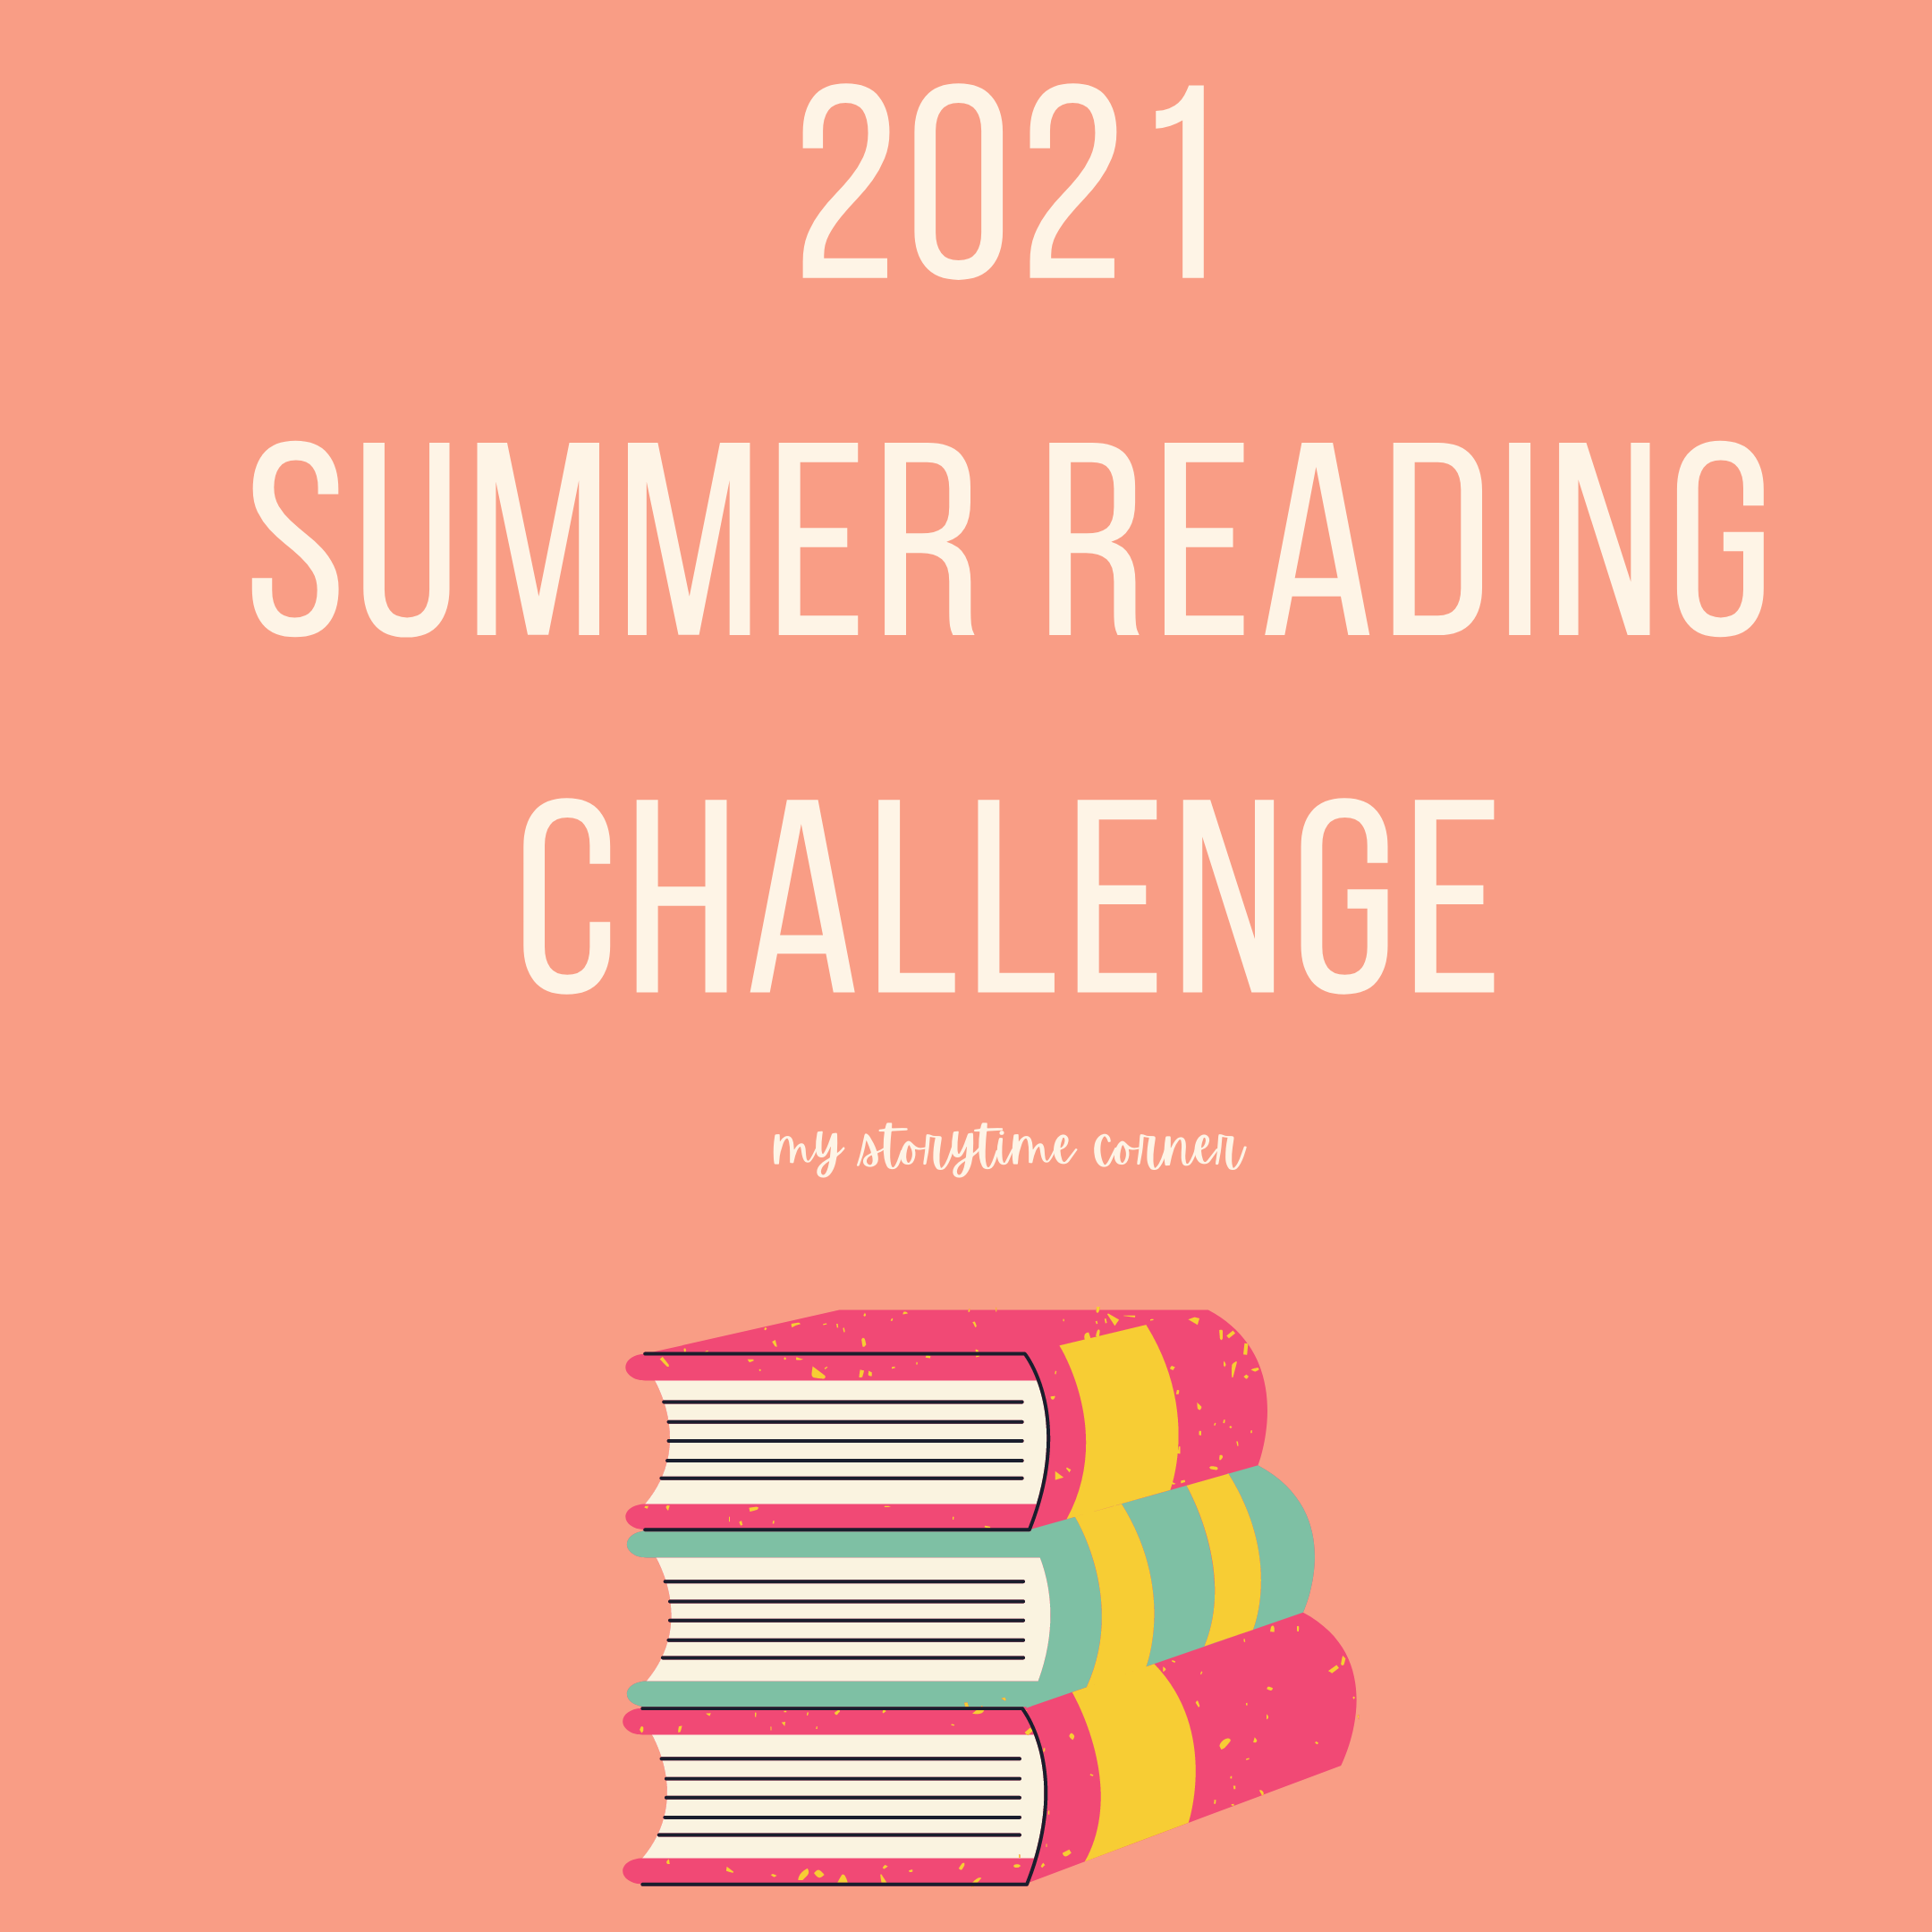 2021 Summer Reading Challenge on My Storytime Corner with Printable